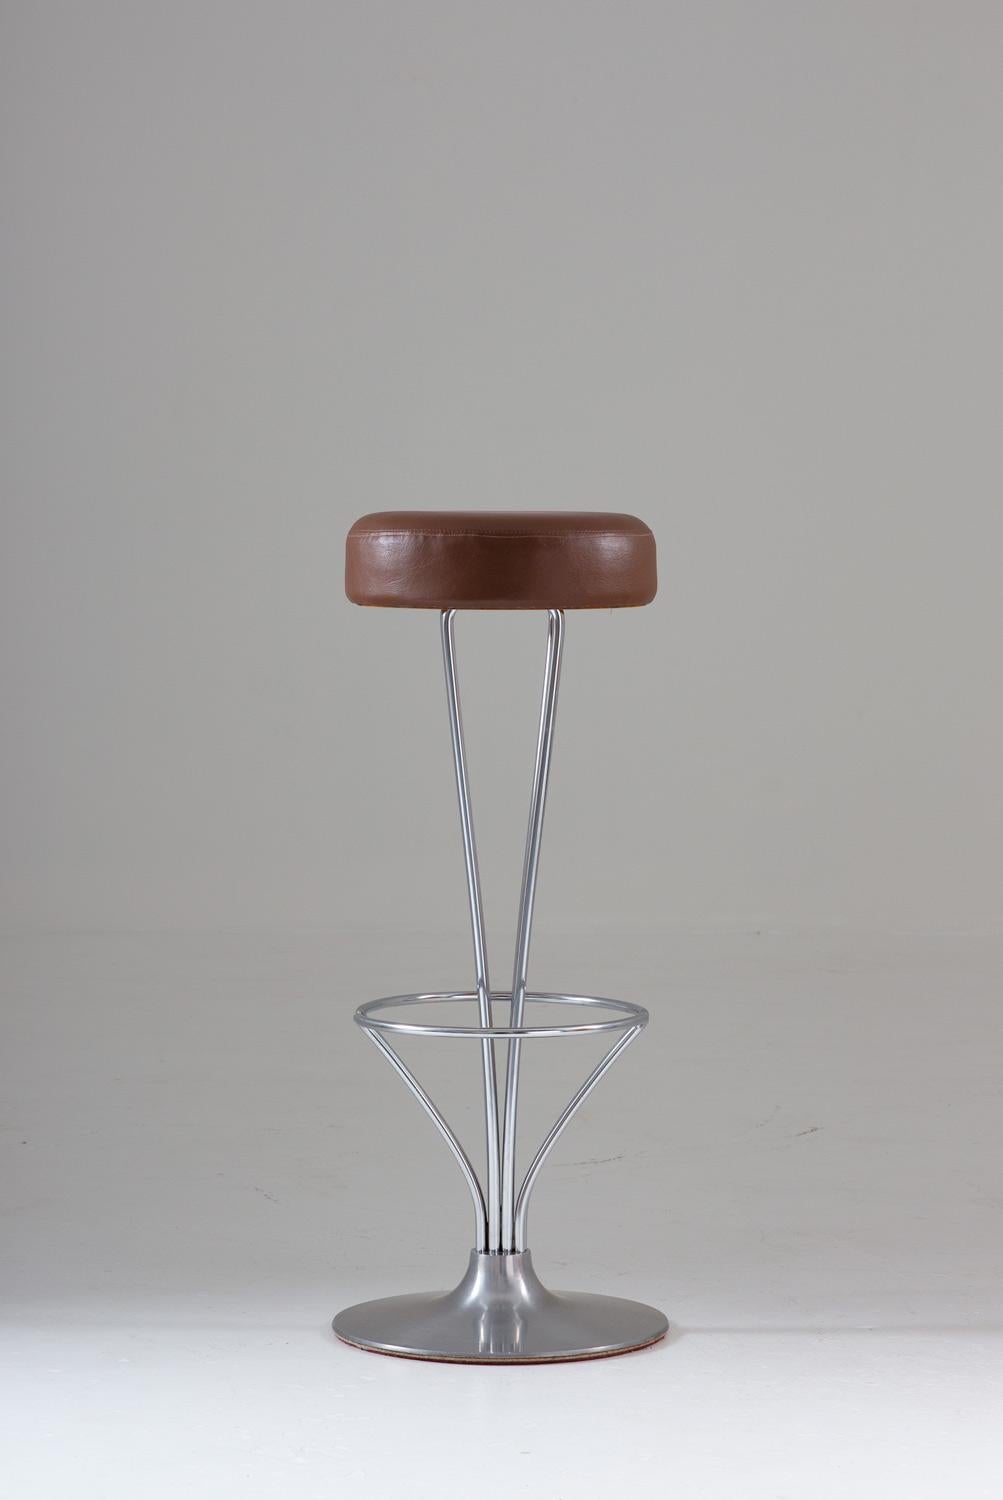 Scandinavian midcentury bar stools by Piet Hein for Fritz Hansen, Manufacture in 1974.
Classic bar stools made of chrome-plated metal with a base of brushed aluminium. Original brown skai upholstery. 

Condition: Very good original condition.